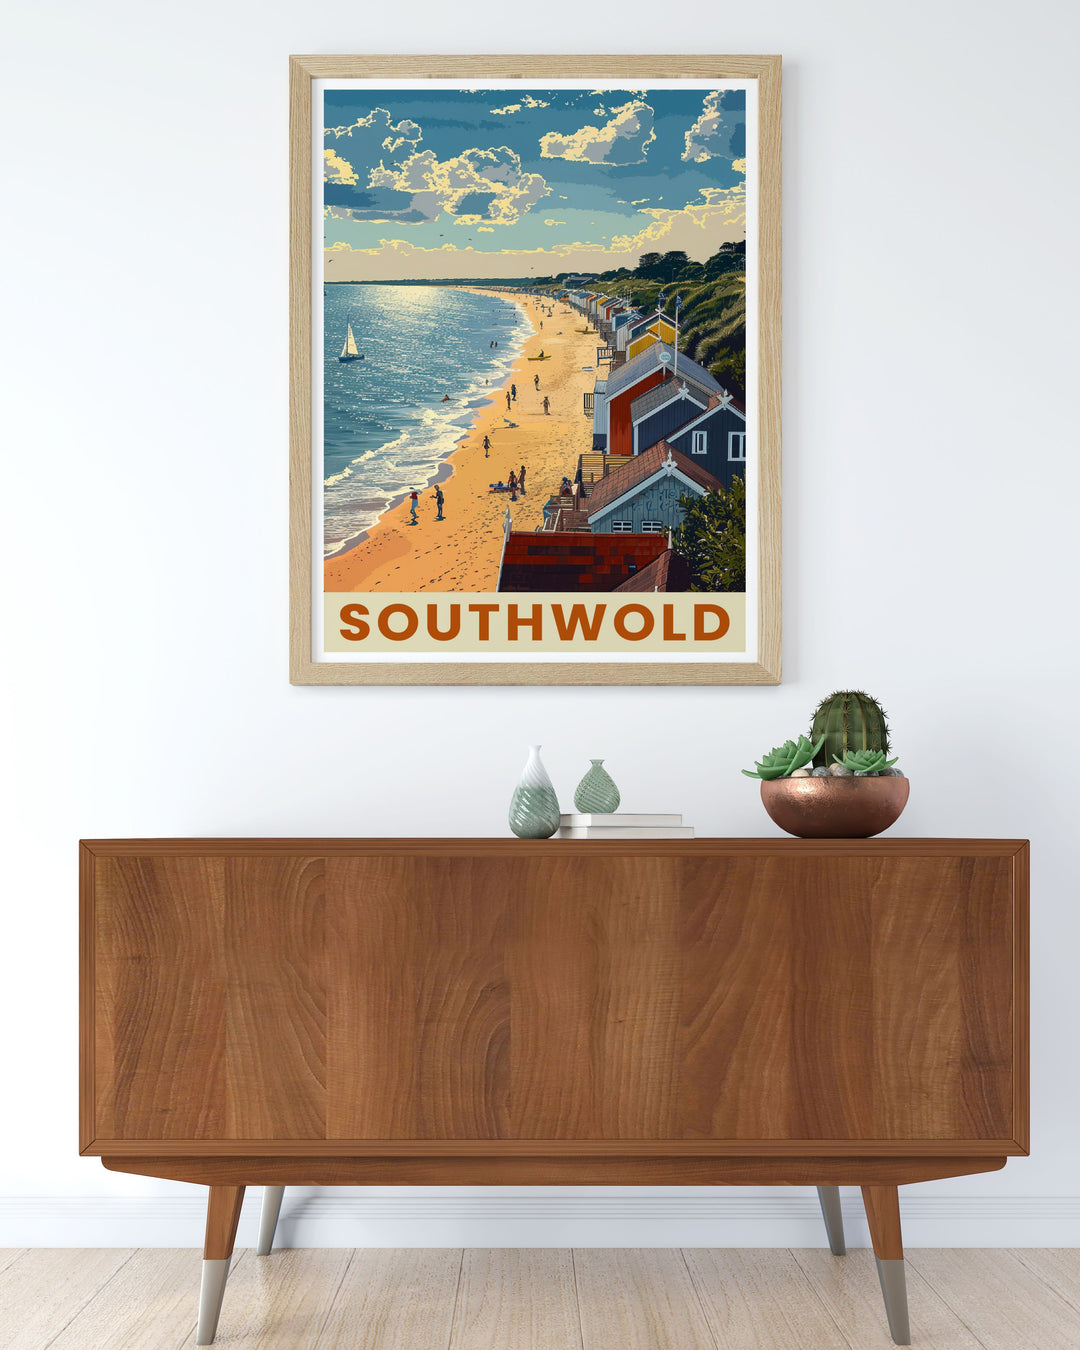 Retro Seaside Poster depicting the colorful beach and beach huts of Southwold along with the well known Southwold Lighthouse and pier an excellent choice for those who appreciate UK travel prints and coastal artwork